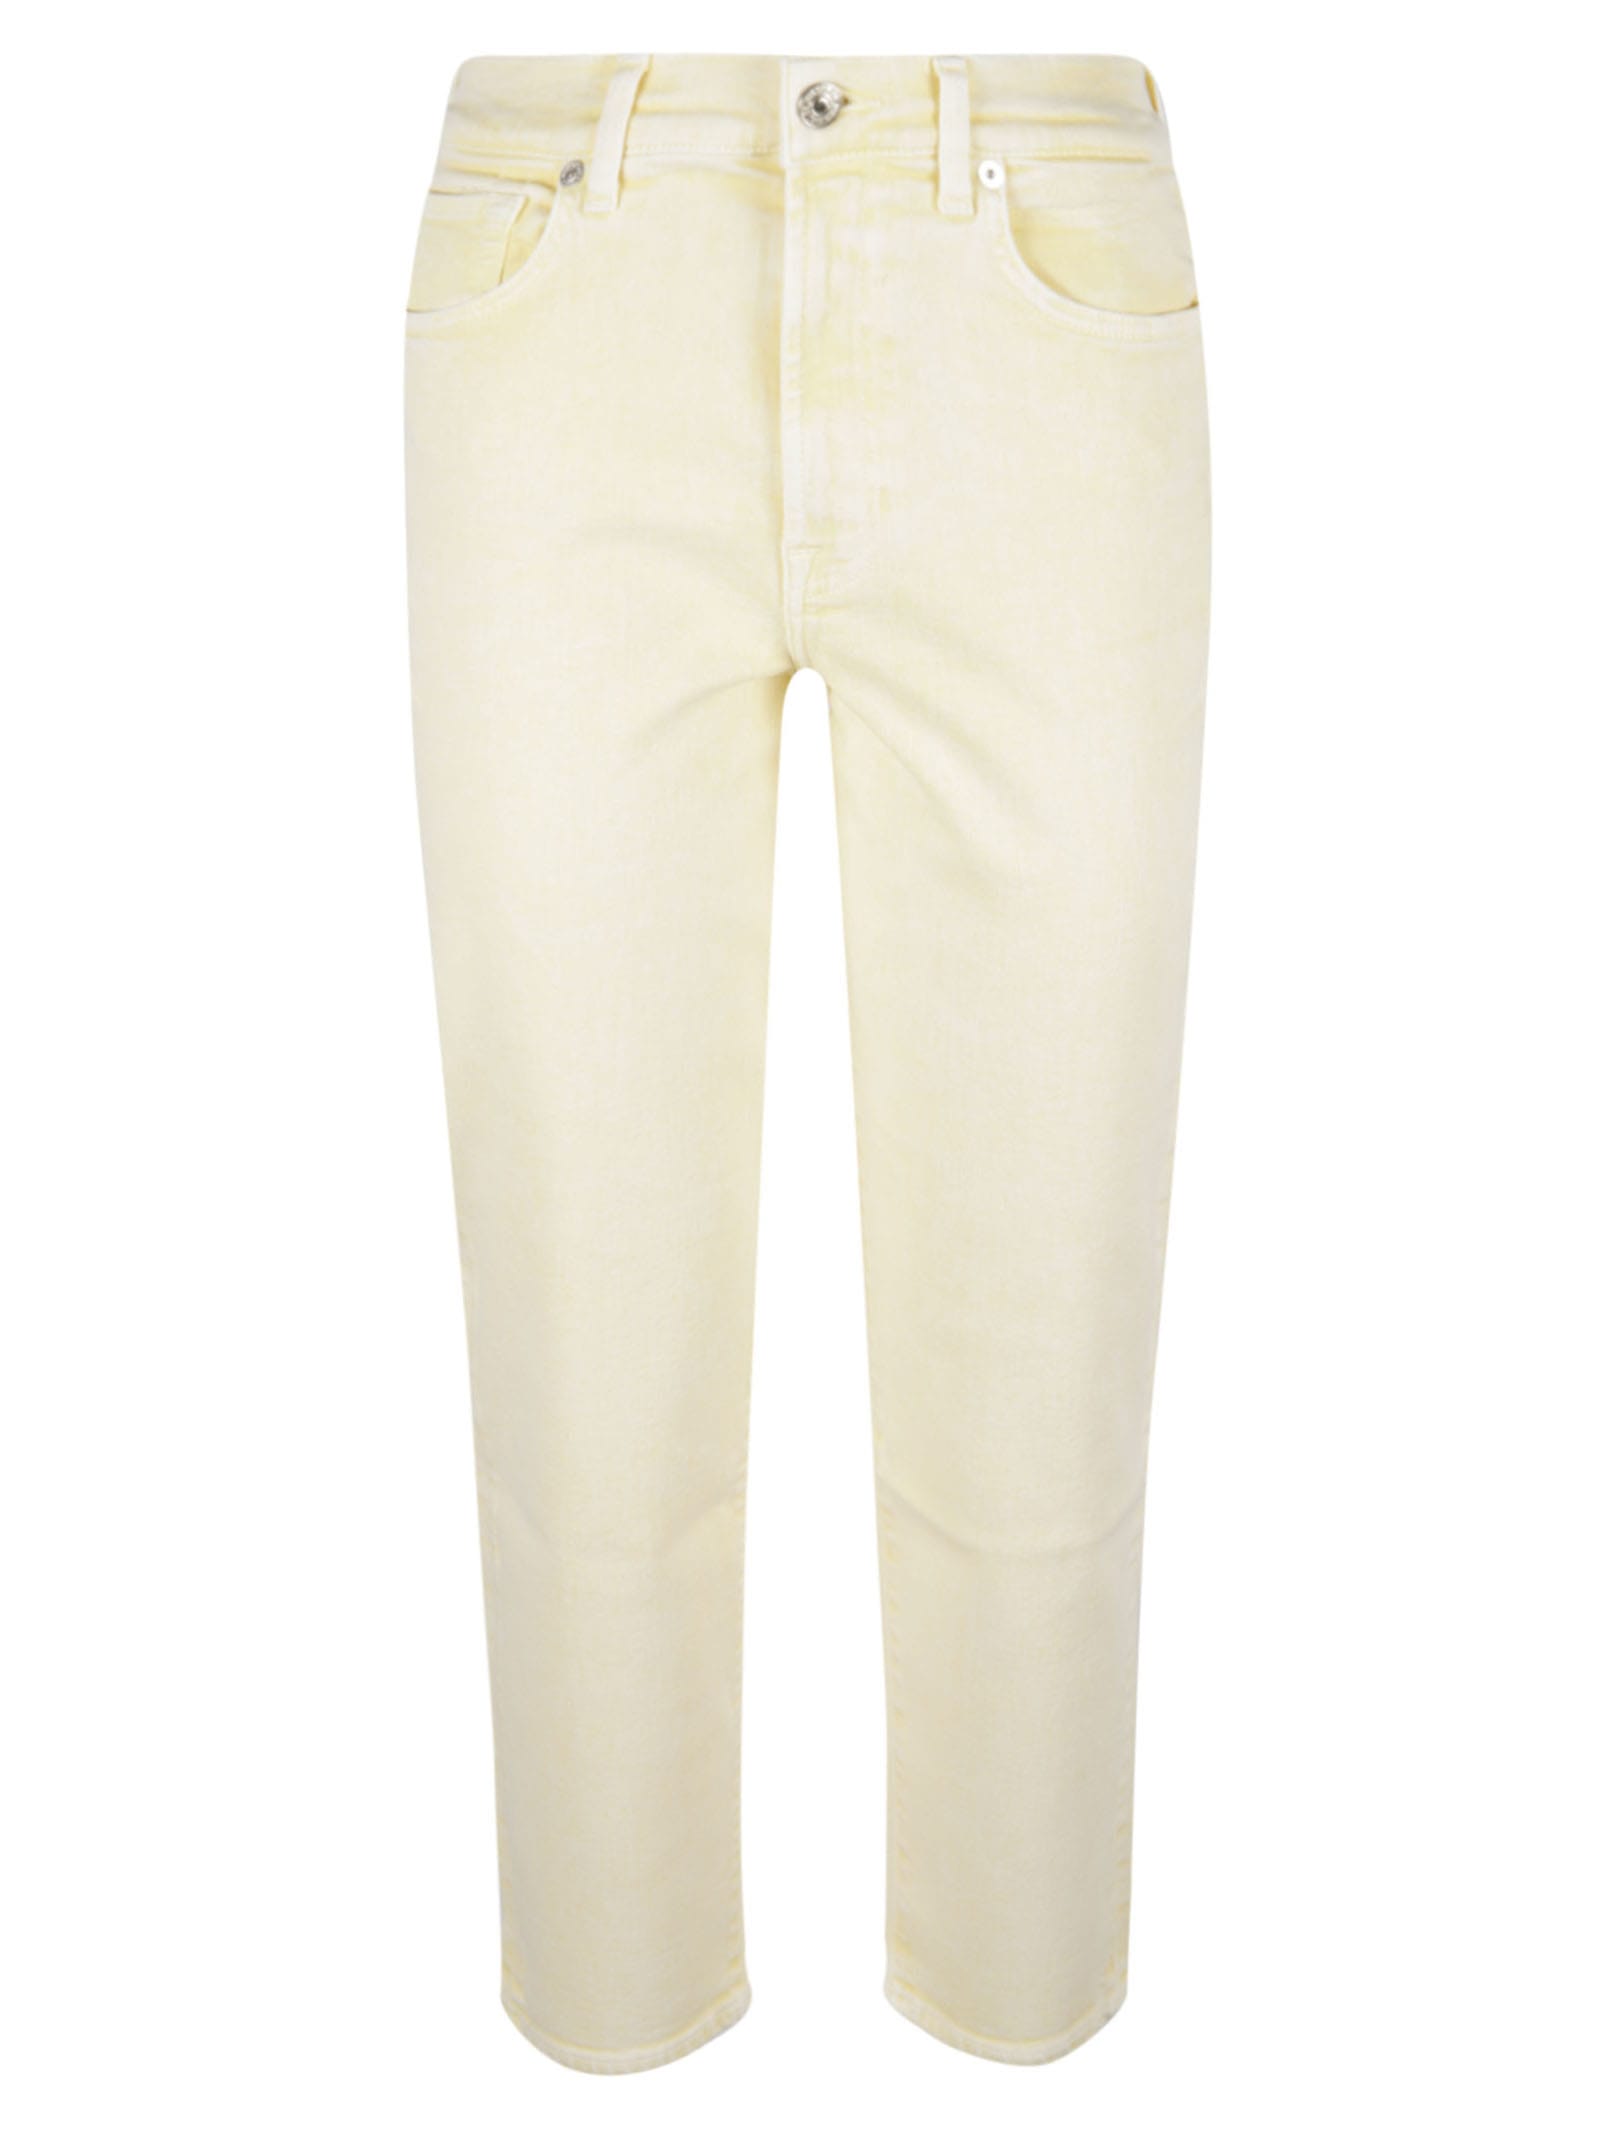 7 For All Mankind Malia Trousers